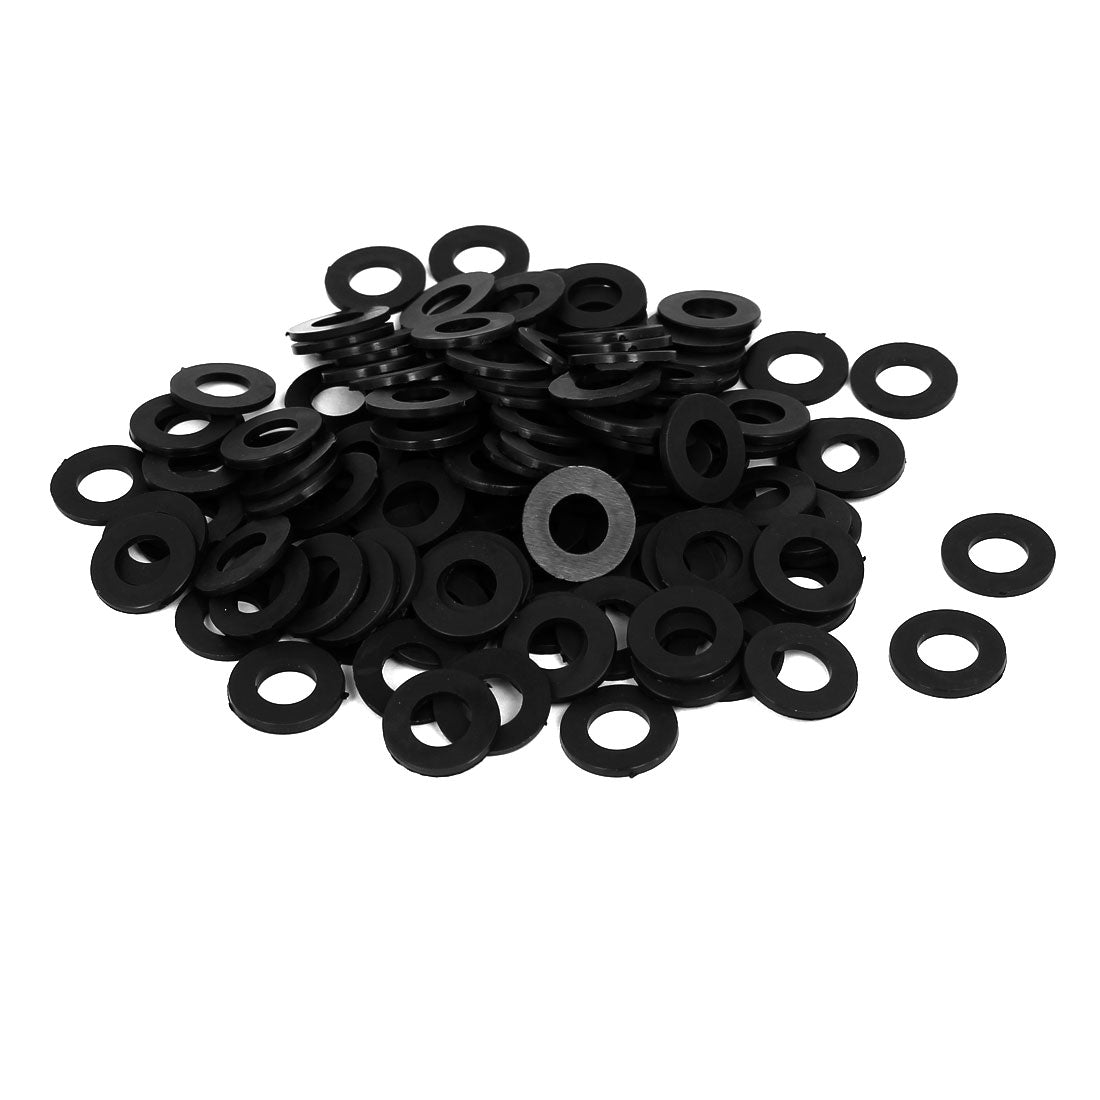 uxcell Uxcell M8 x 16mm x 1.5mm Nylon Flat Washers Spacers Gaskets Fastener Black 200PCS